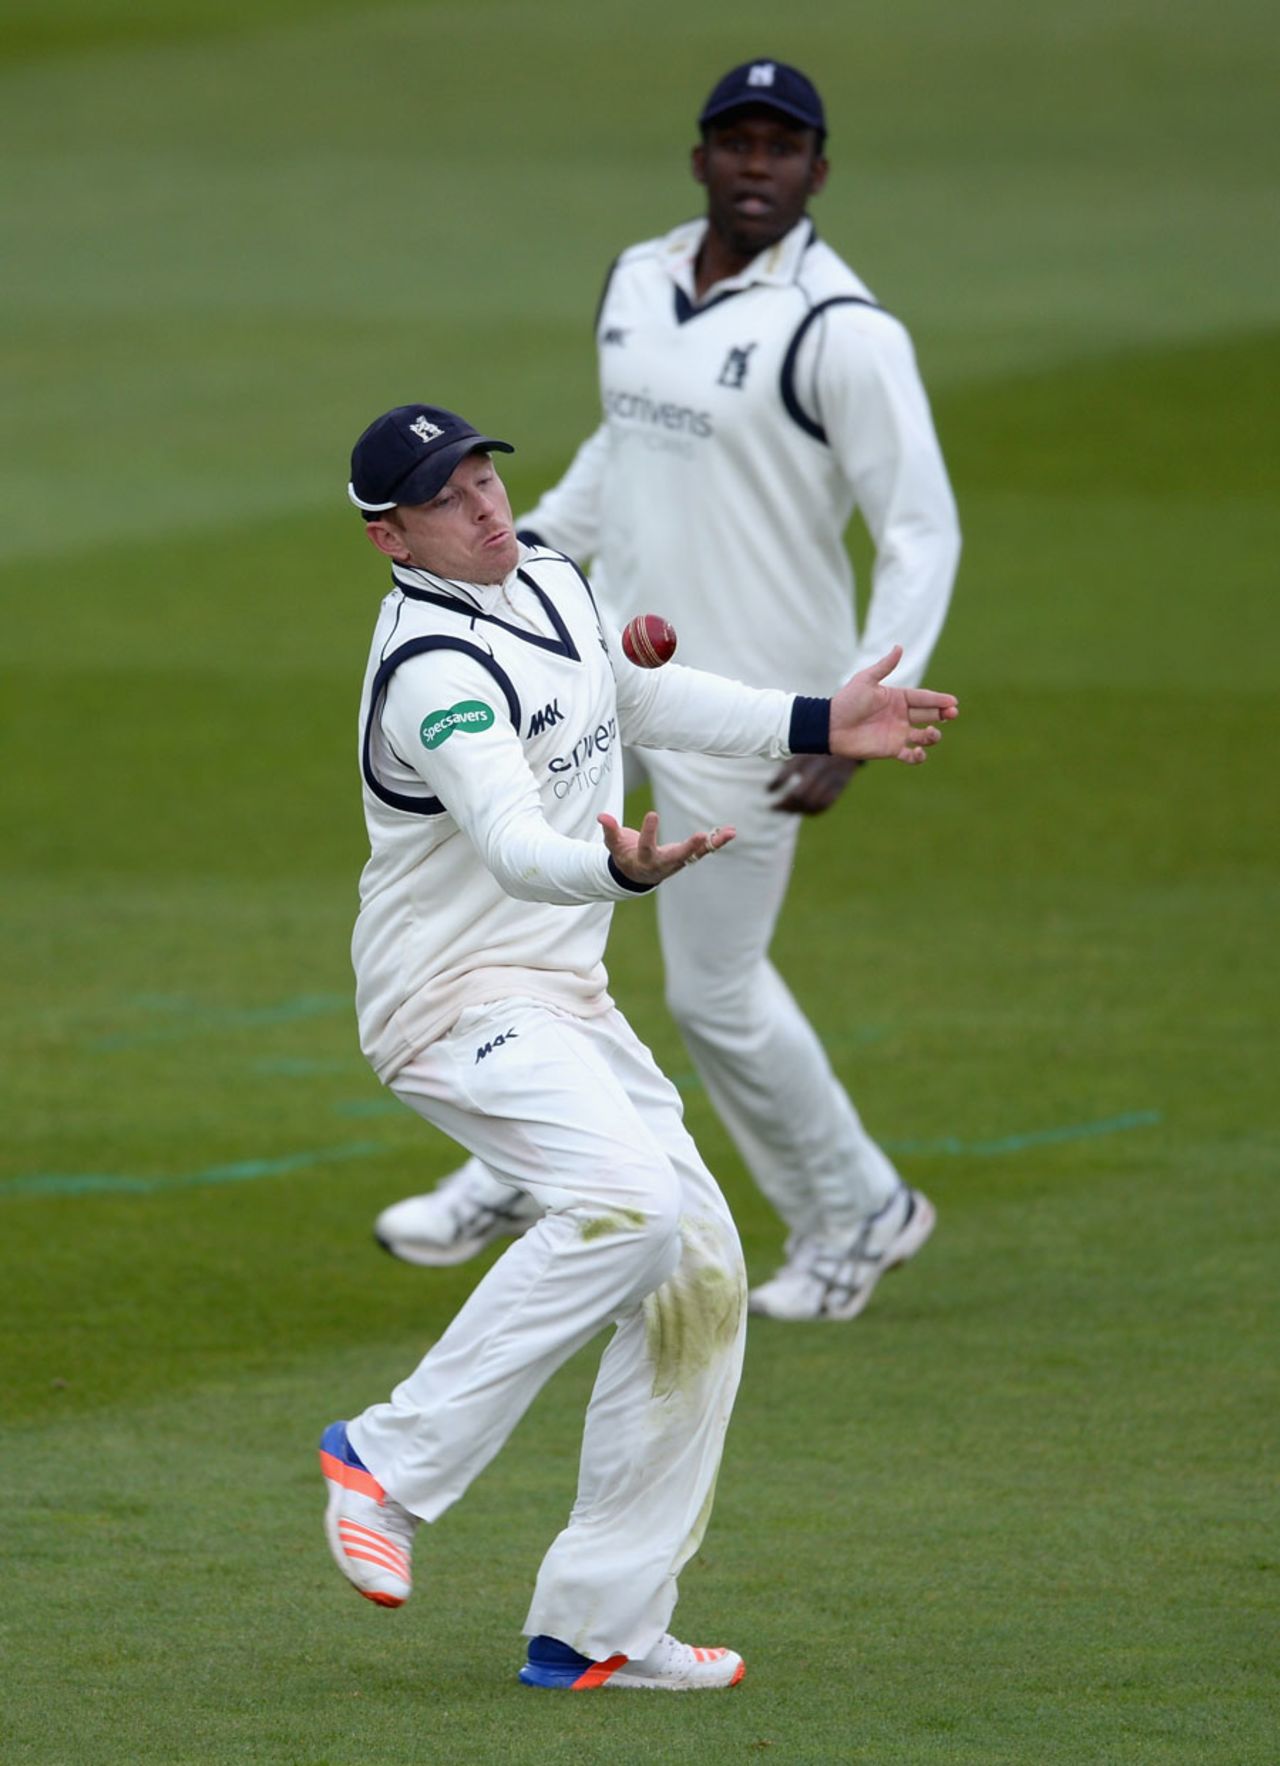 Ian Bell juggles a catch to dismiss Adam Lyth, Warwickshire v Yorkshire, County Championship, Division One, Edgbaston, 1st day, April 24, 2015